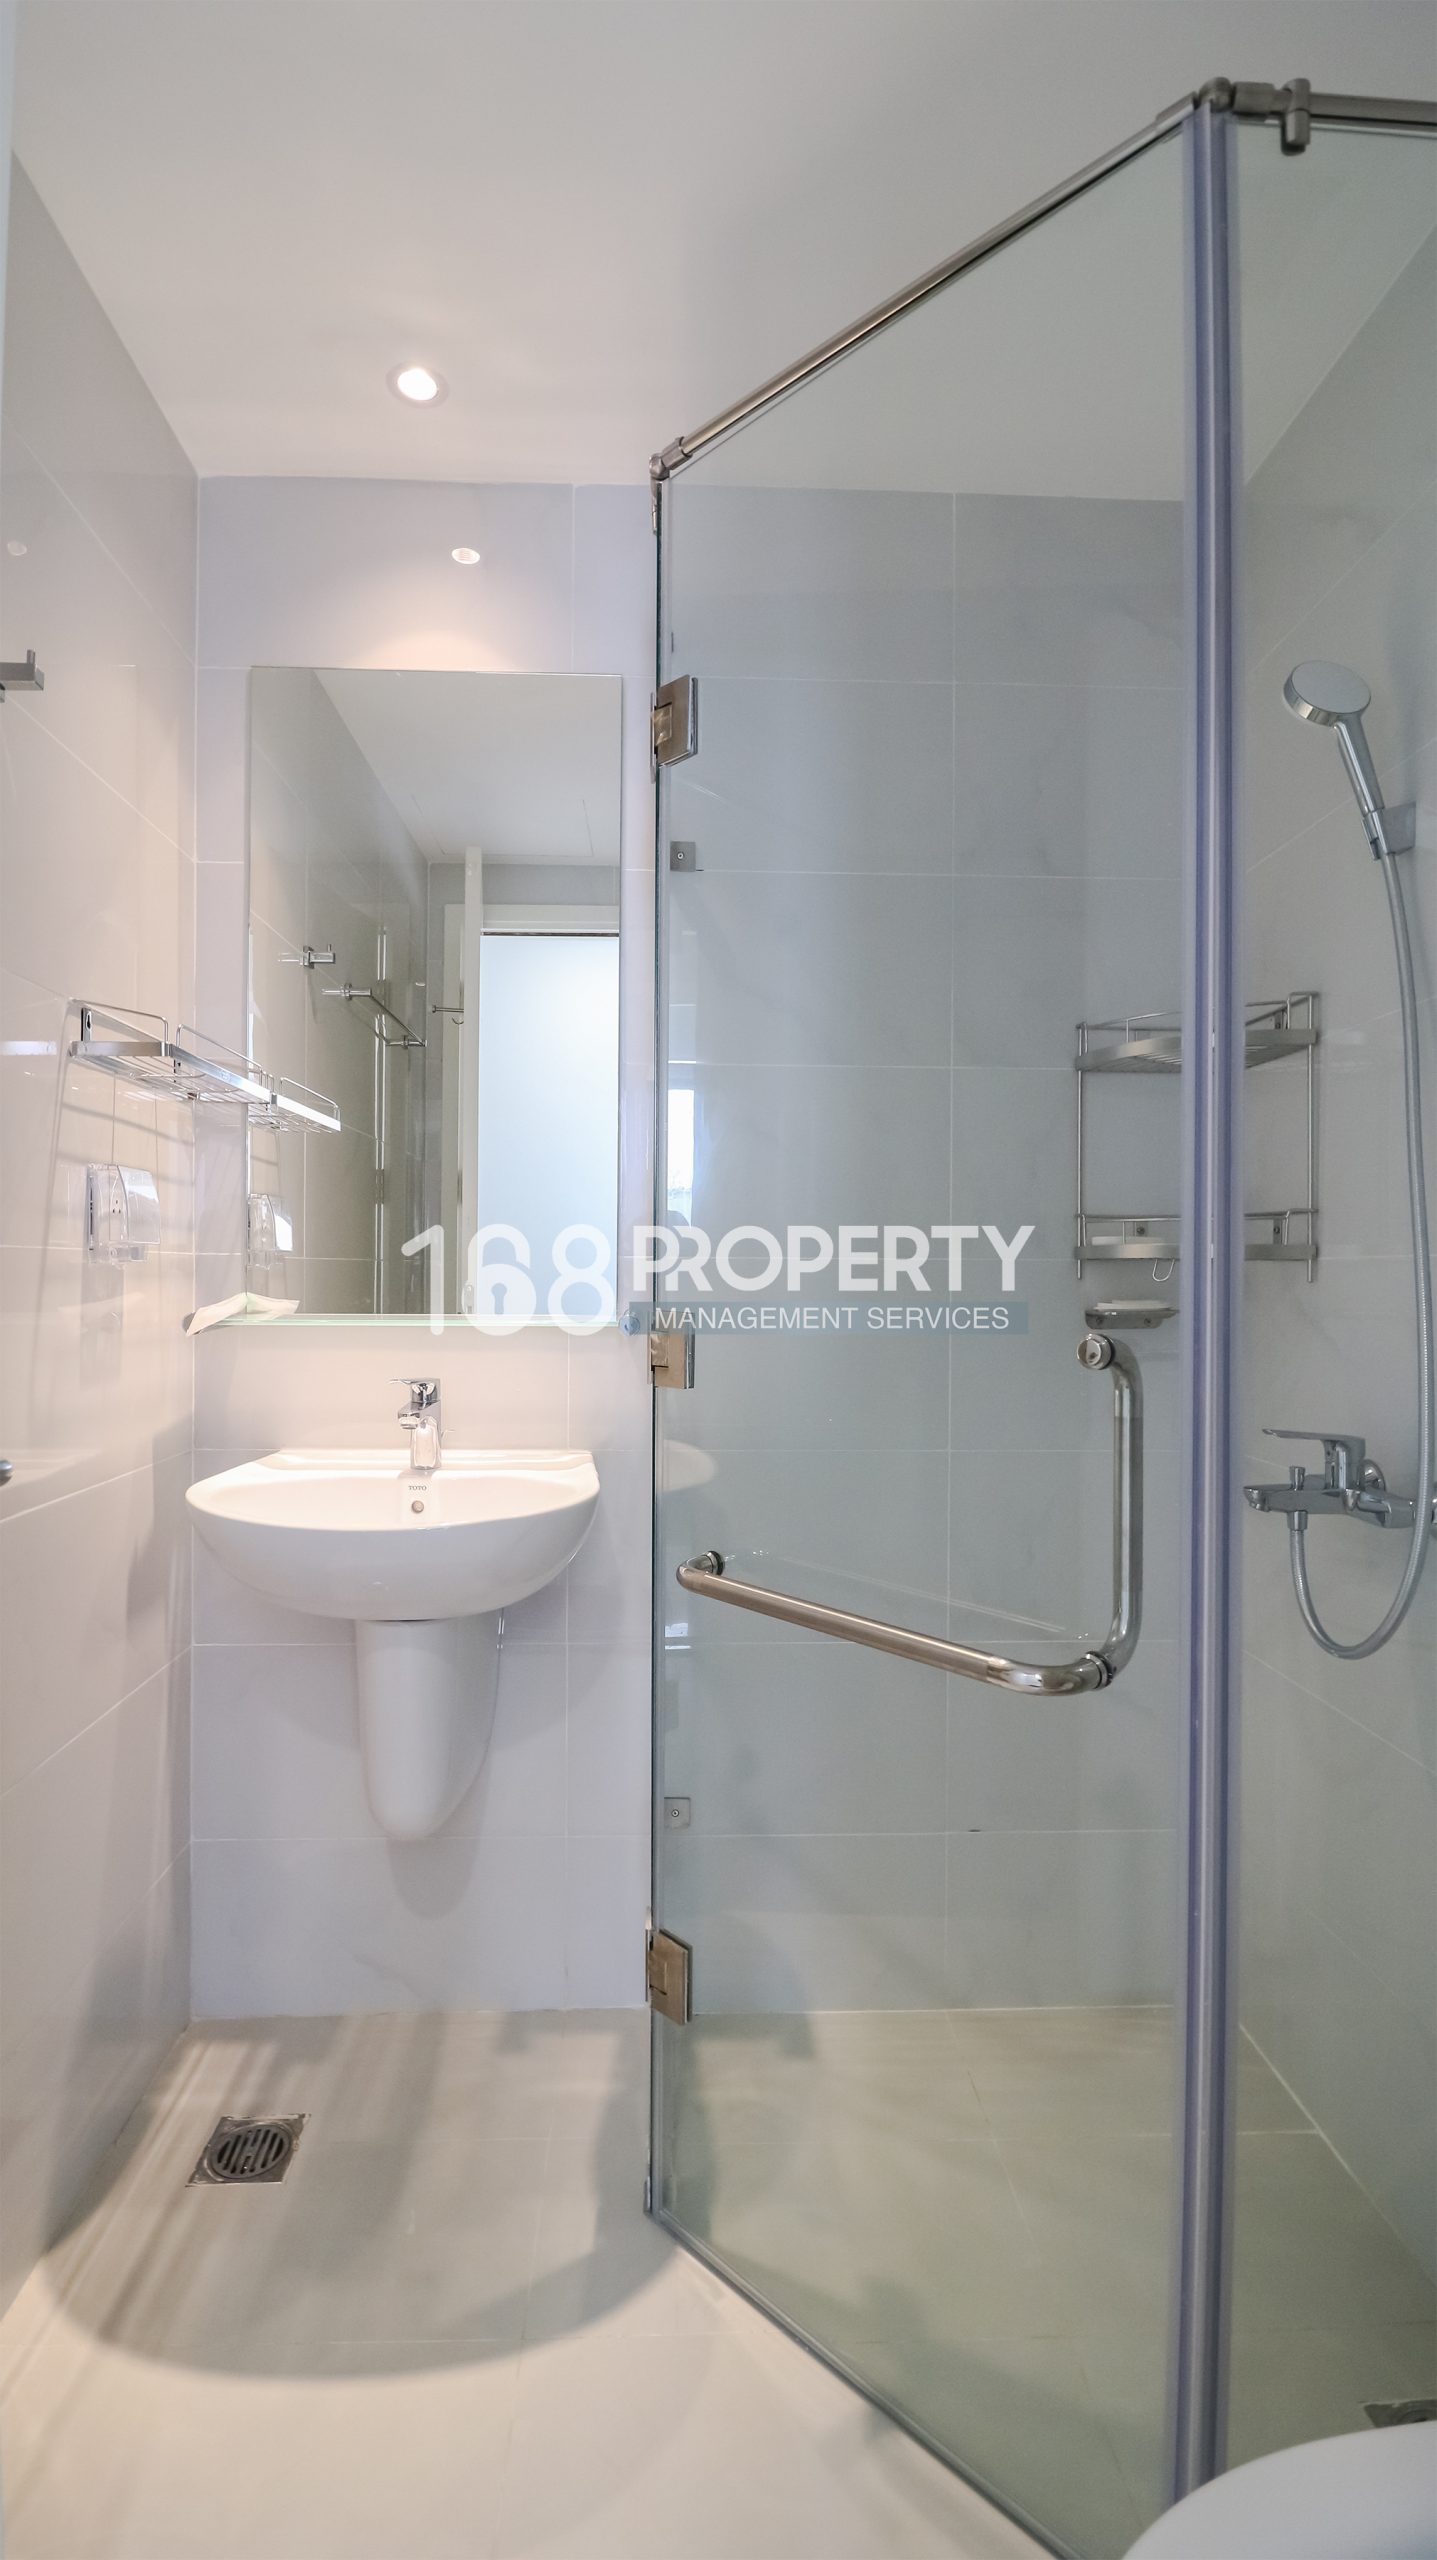 Masteri An Phu apartment for rent in thao dien 168property